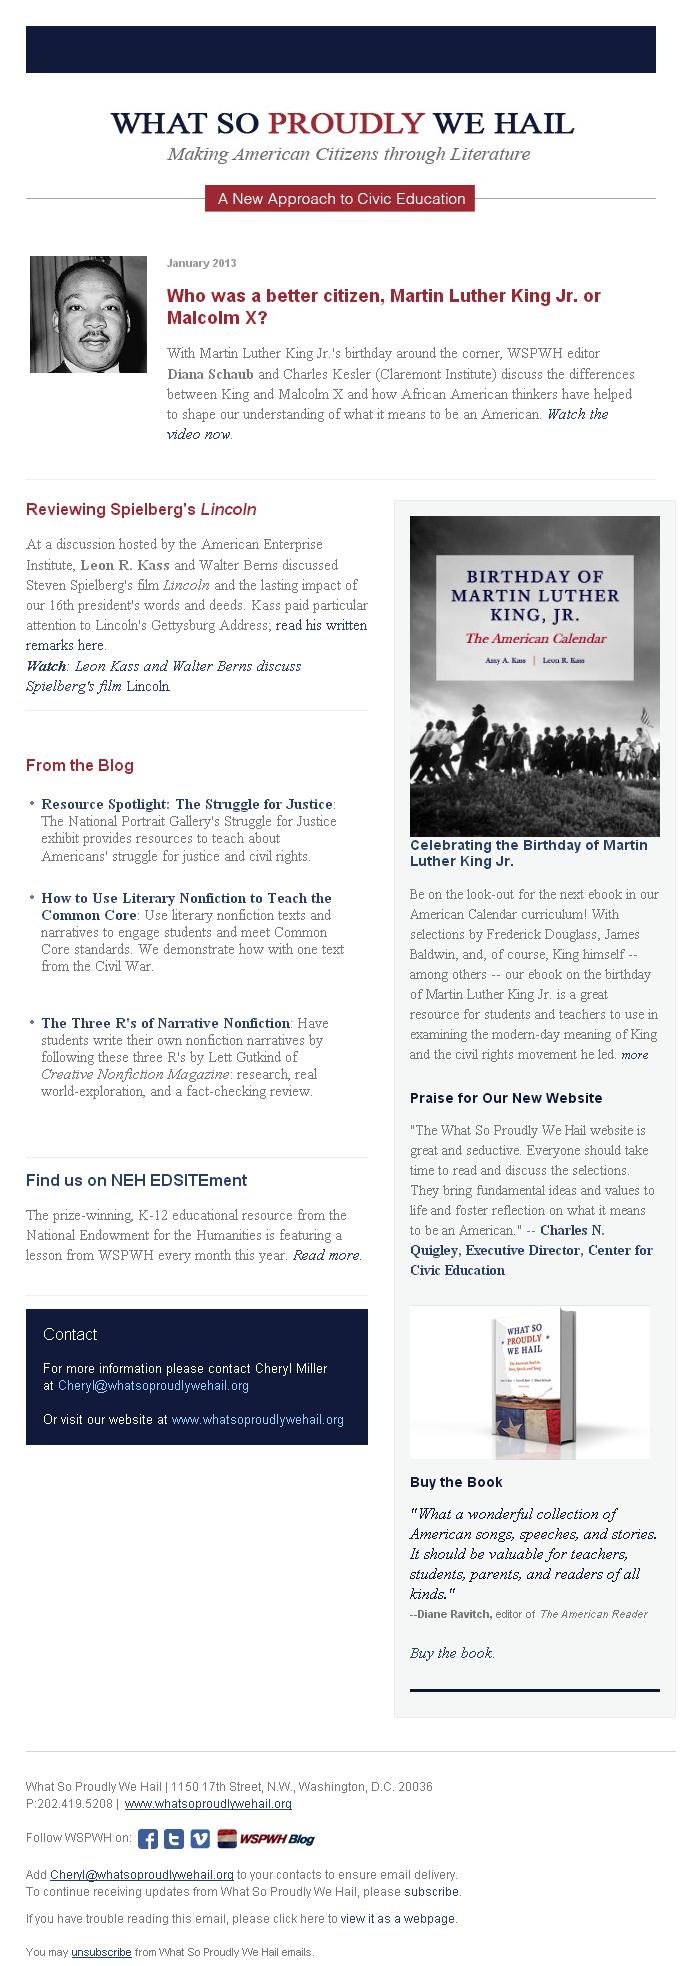 WSPWH January 2013 newsletter